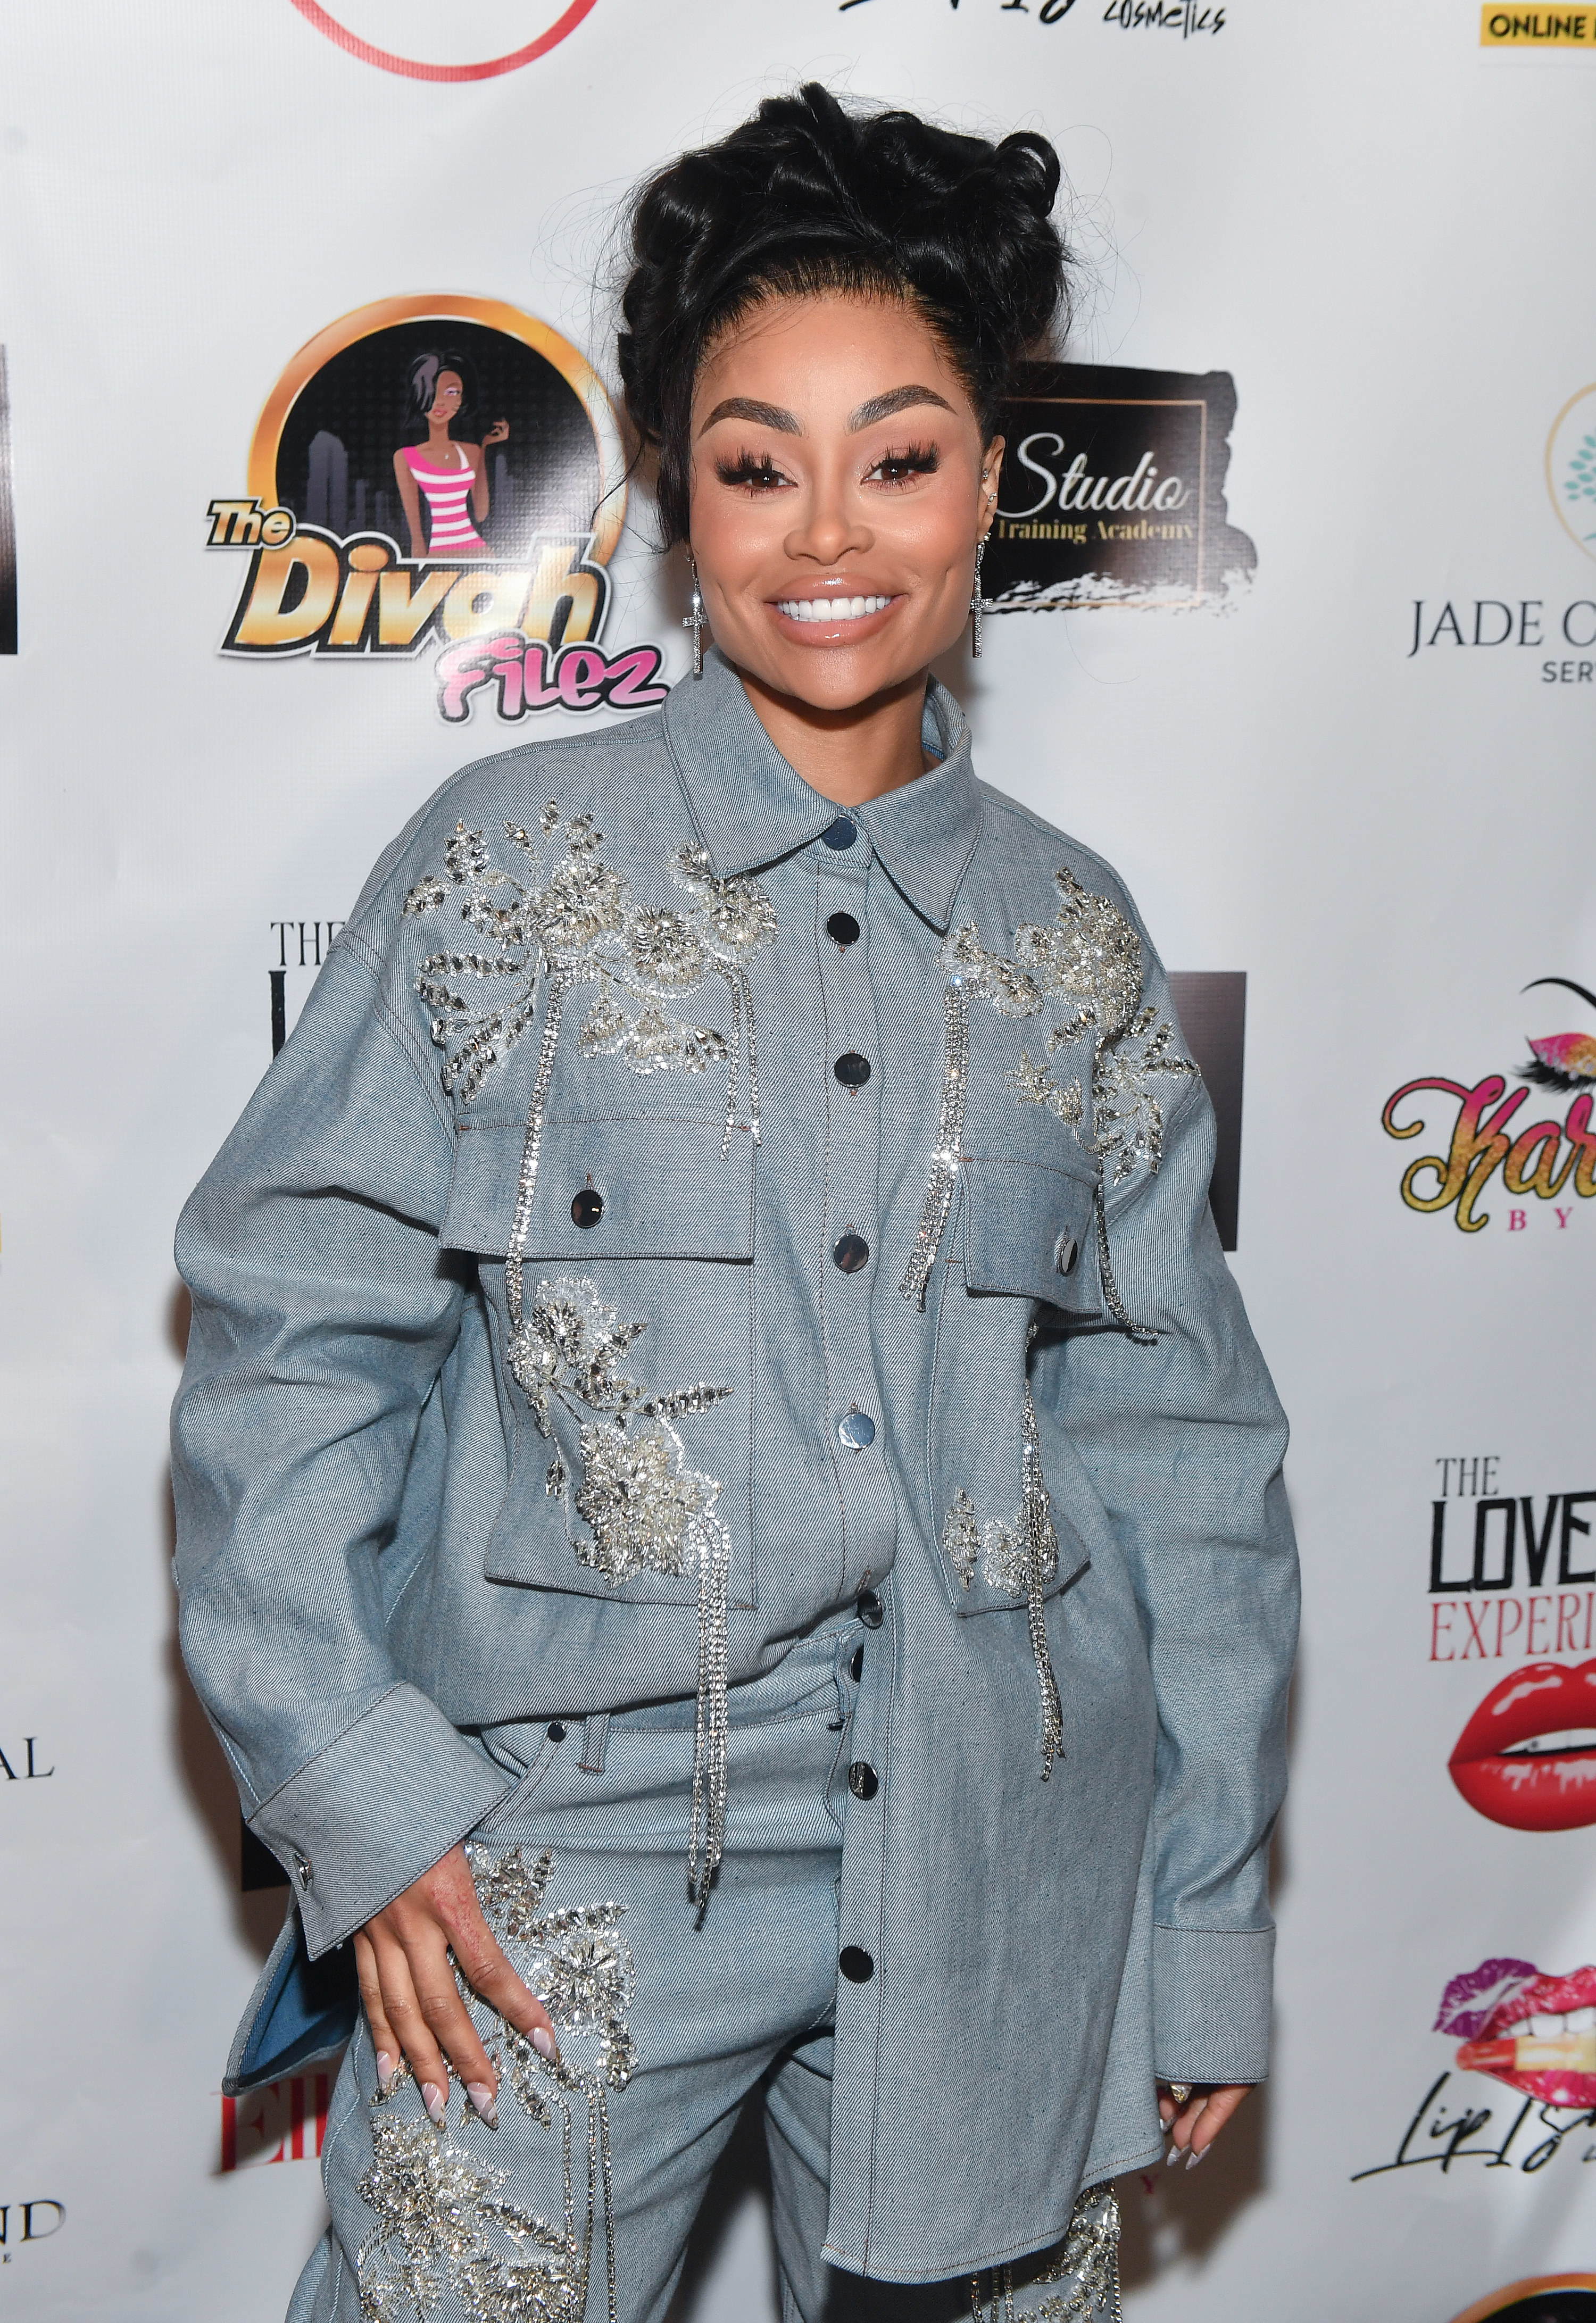 Blac Chyna Shares Her Kids' Reactions To Her Breast And Butt Reductions